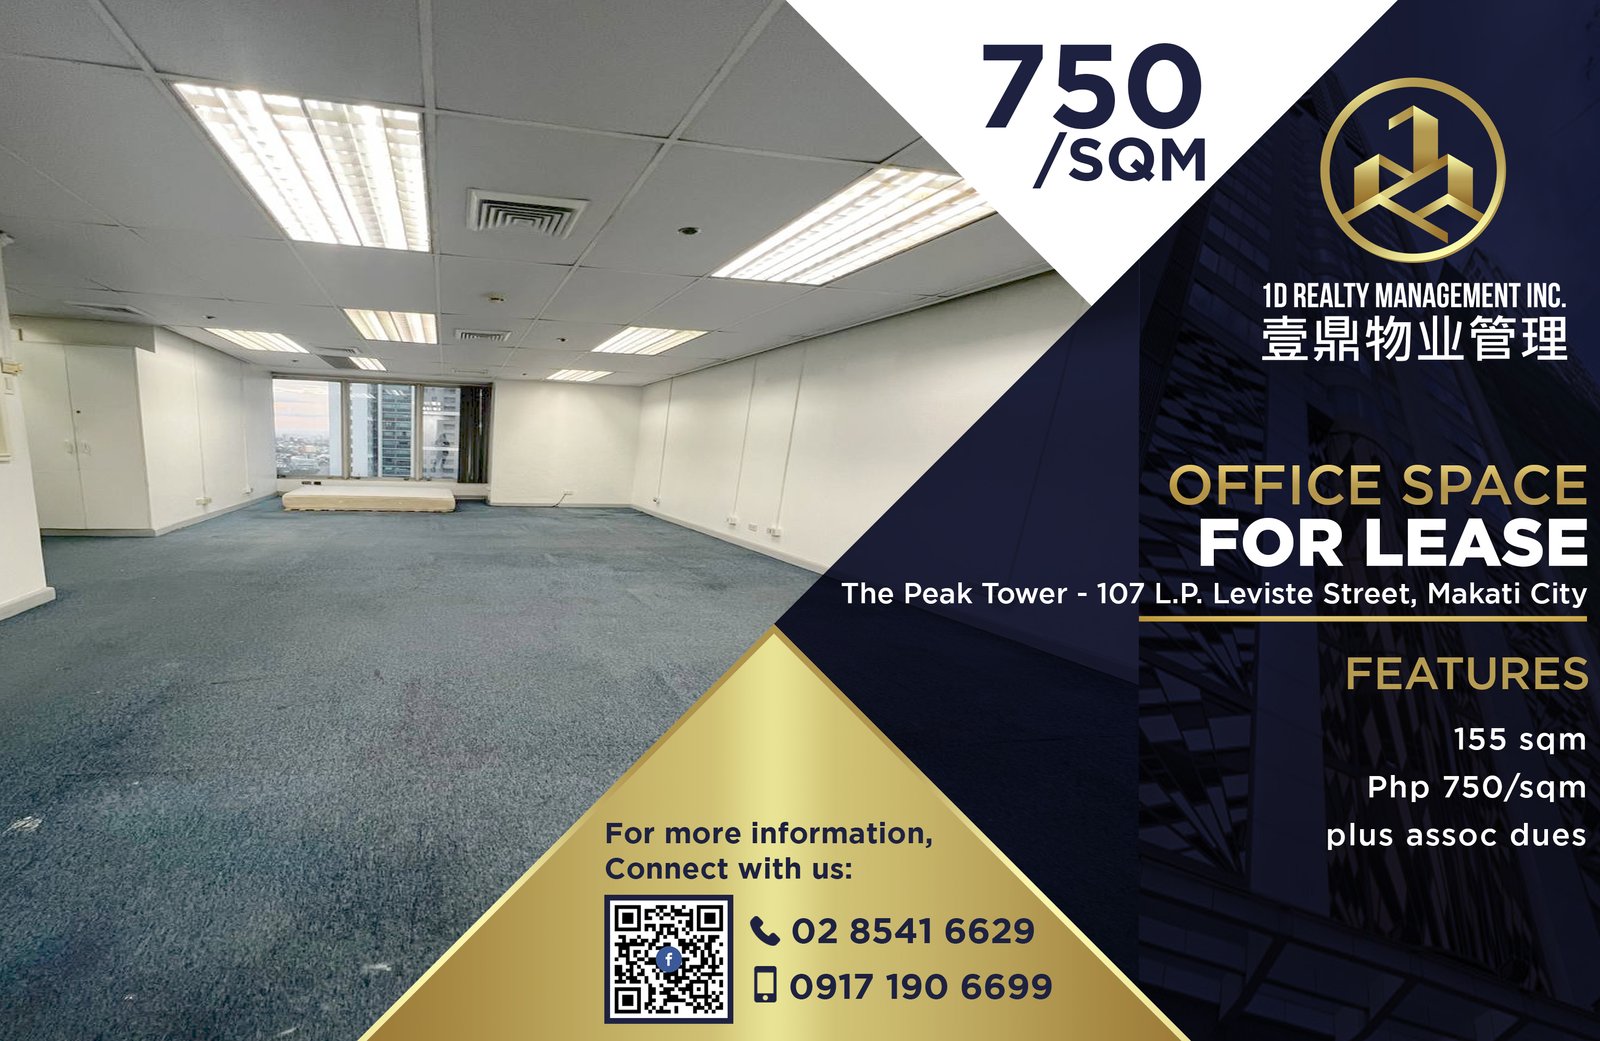 FOR LEASE Office Space - The Peak Tower - 107 L.P. Leviste Street, Makati City